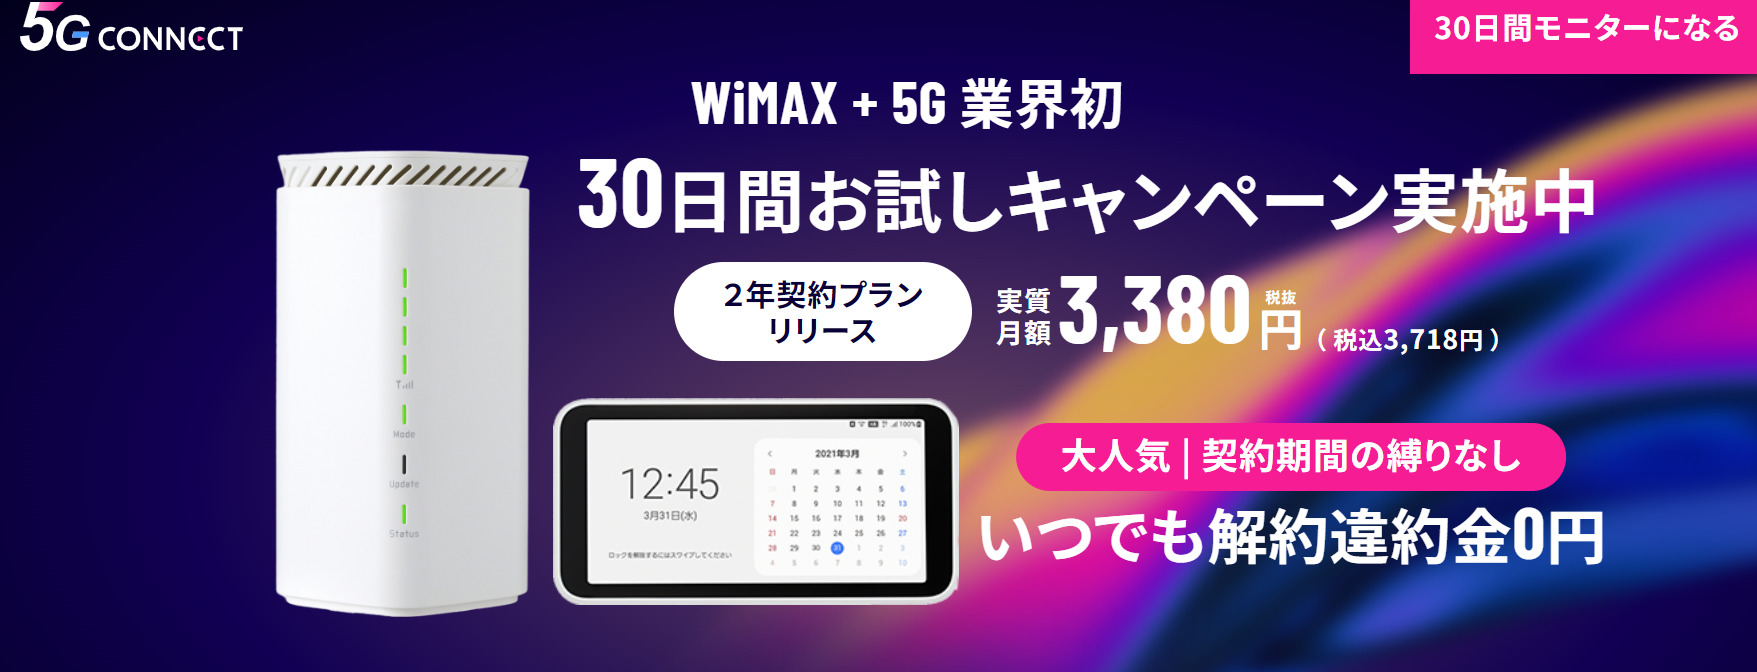 5G CONNECTの説明画像